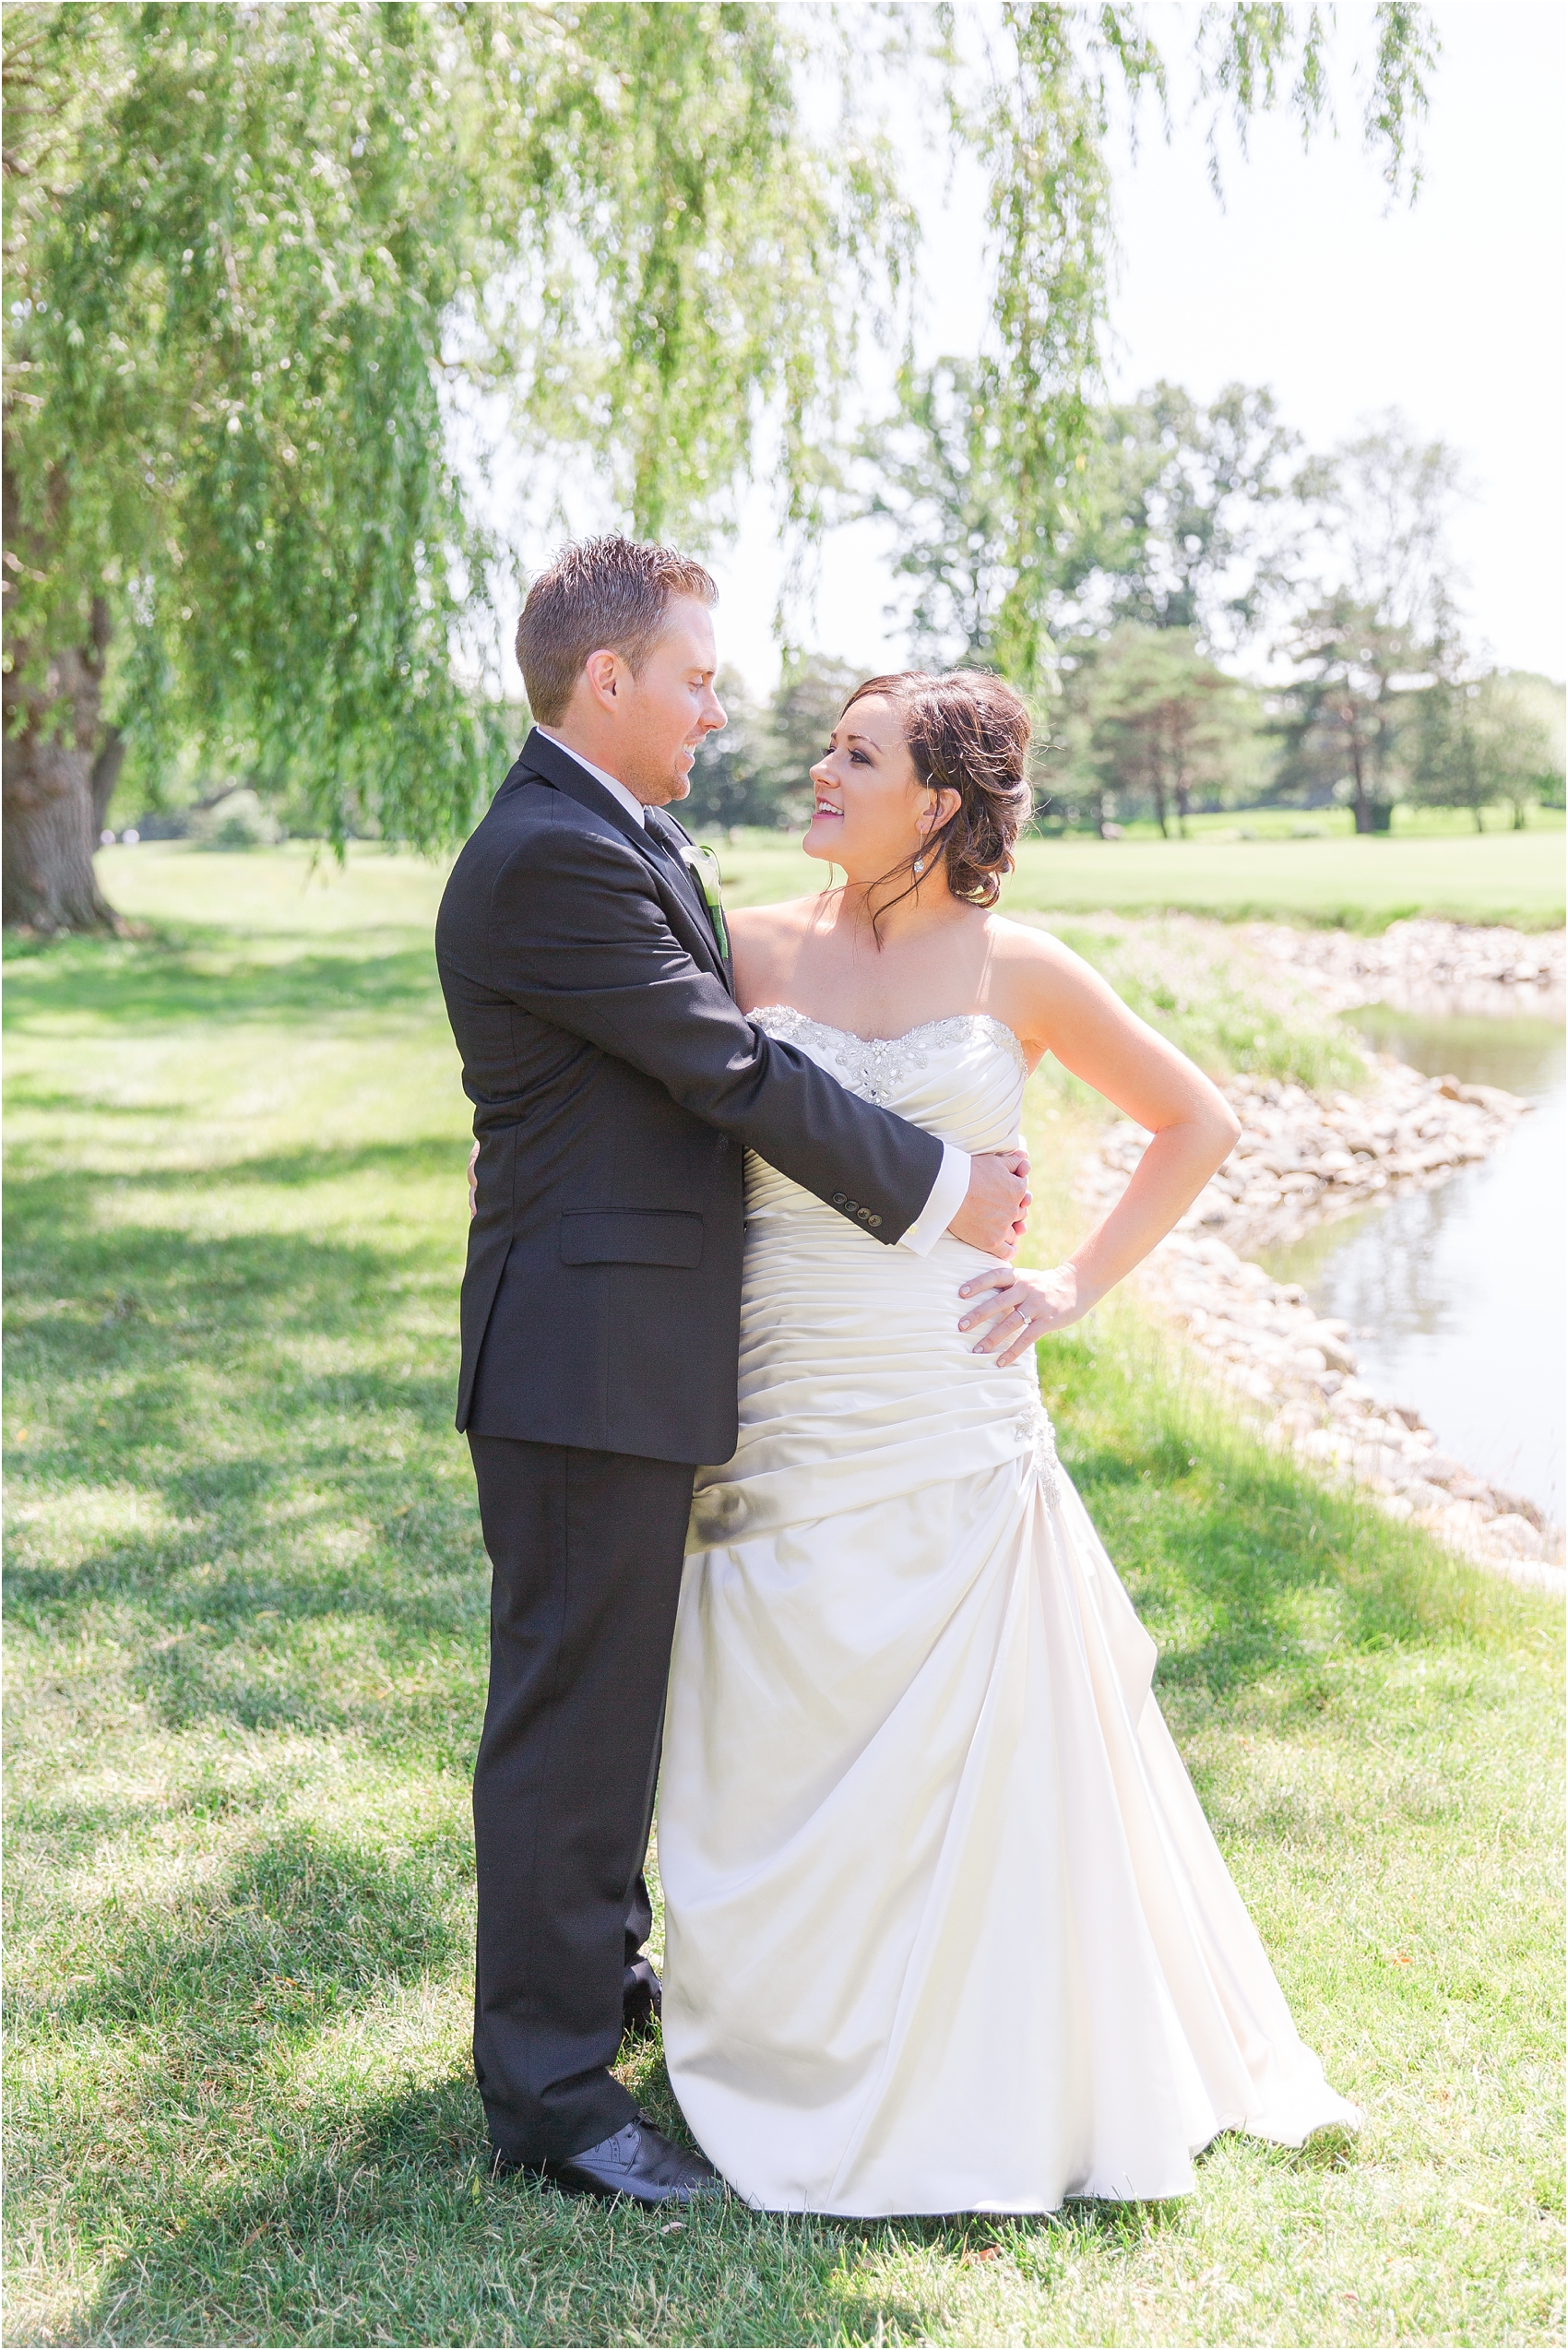 classic-wedding-photos-at-great-oaks-country-club-in-rochester-hills-mi-by-courtney-carolyn-photography_0034.jpg